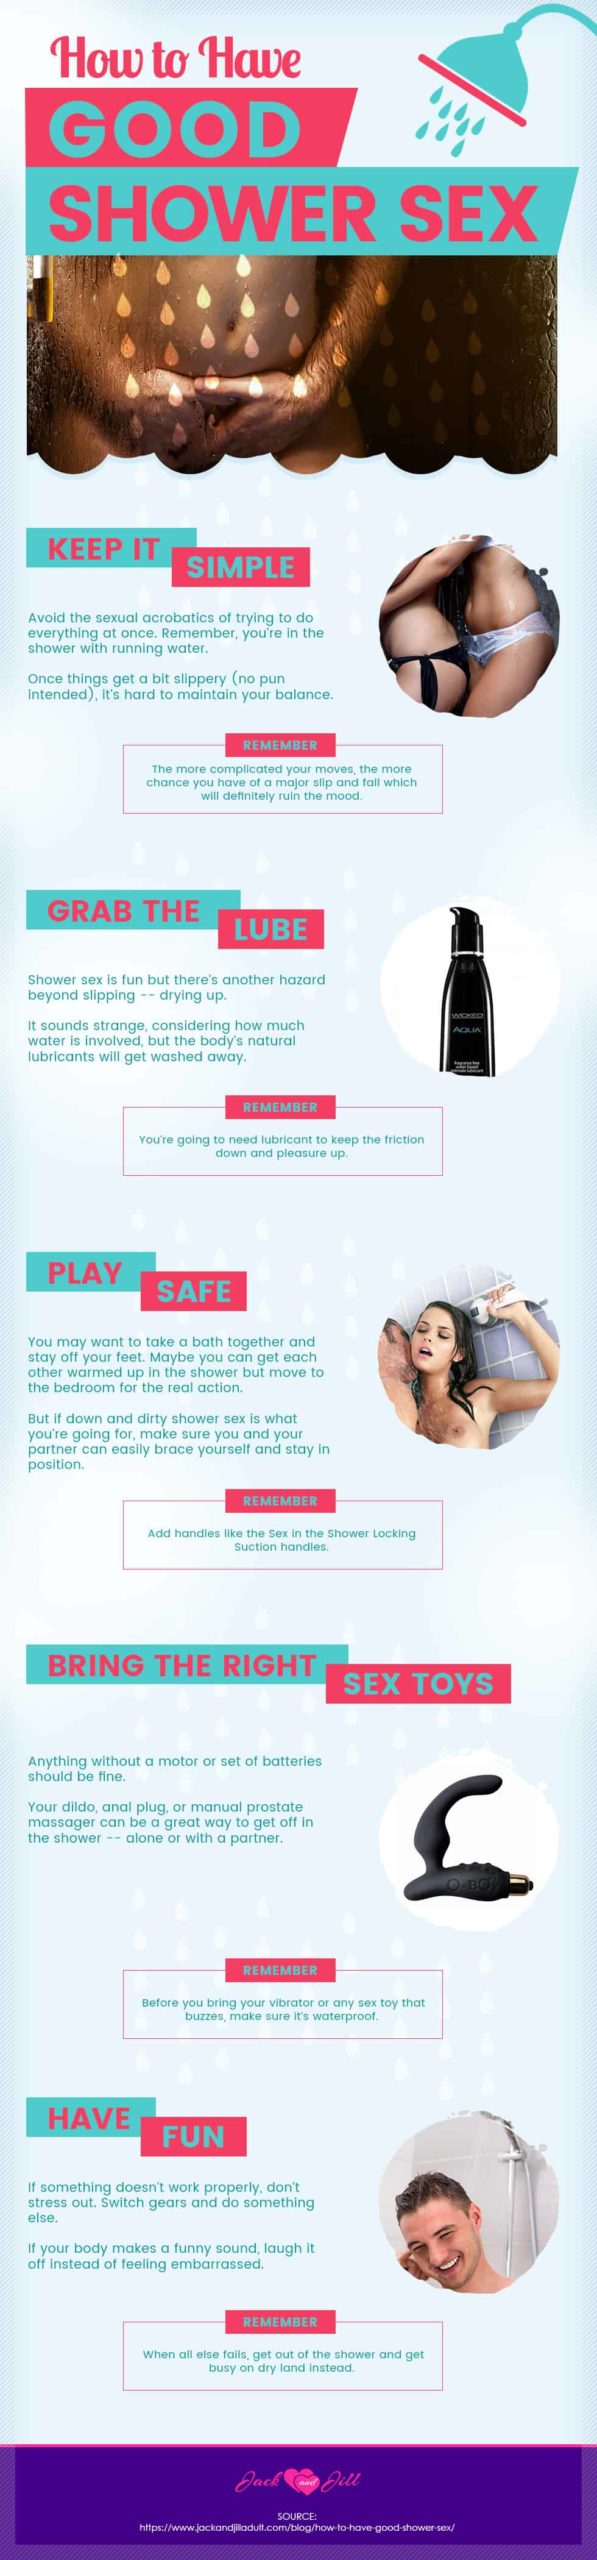 Infographic for How to Have Good Shower Sex